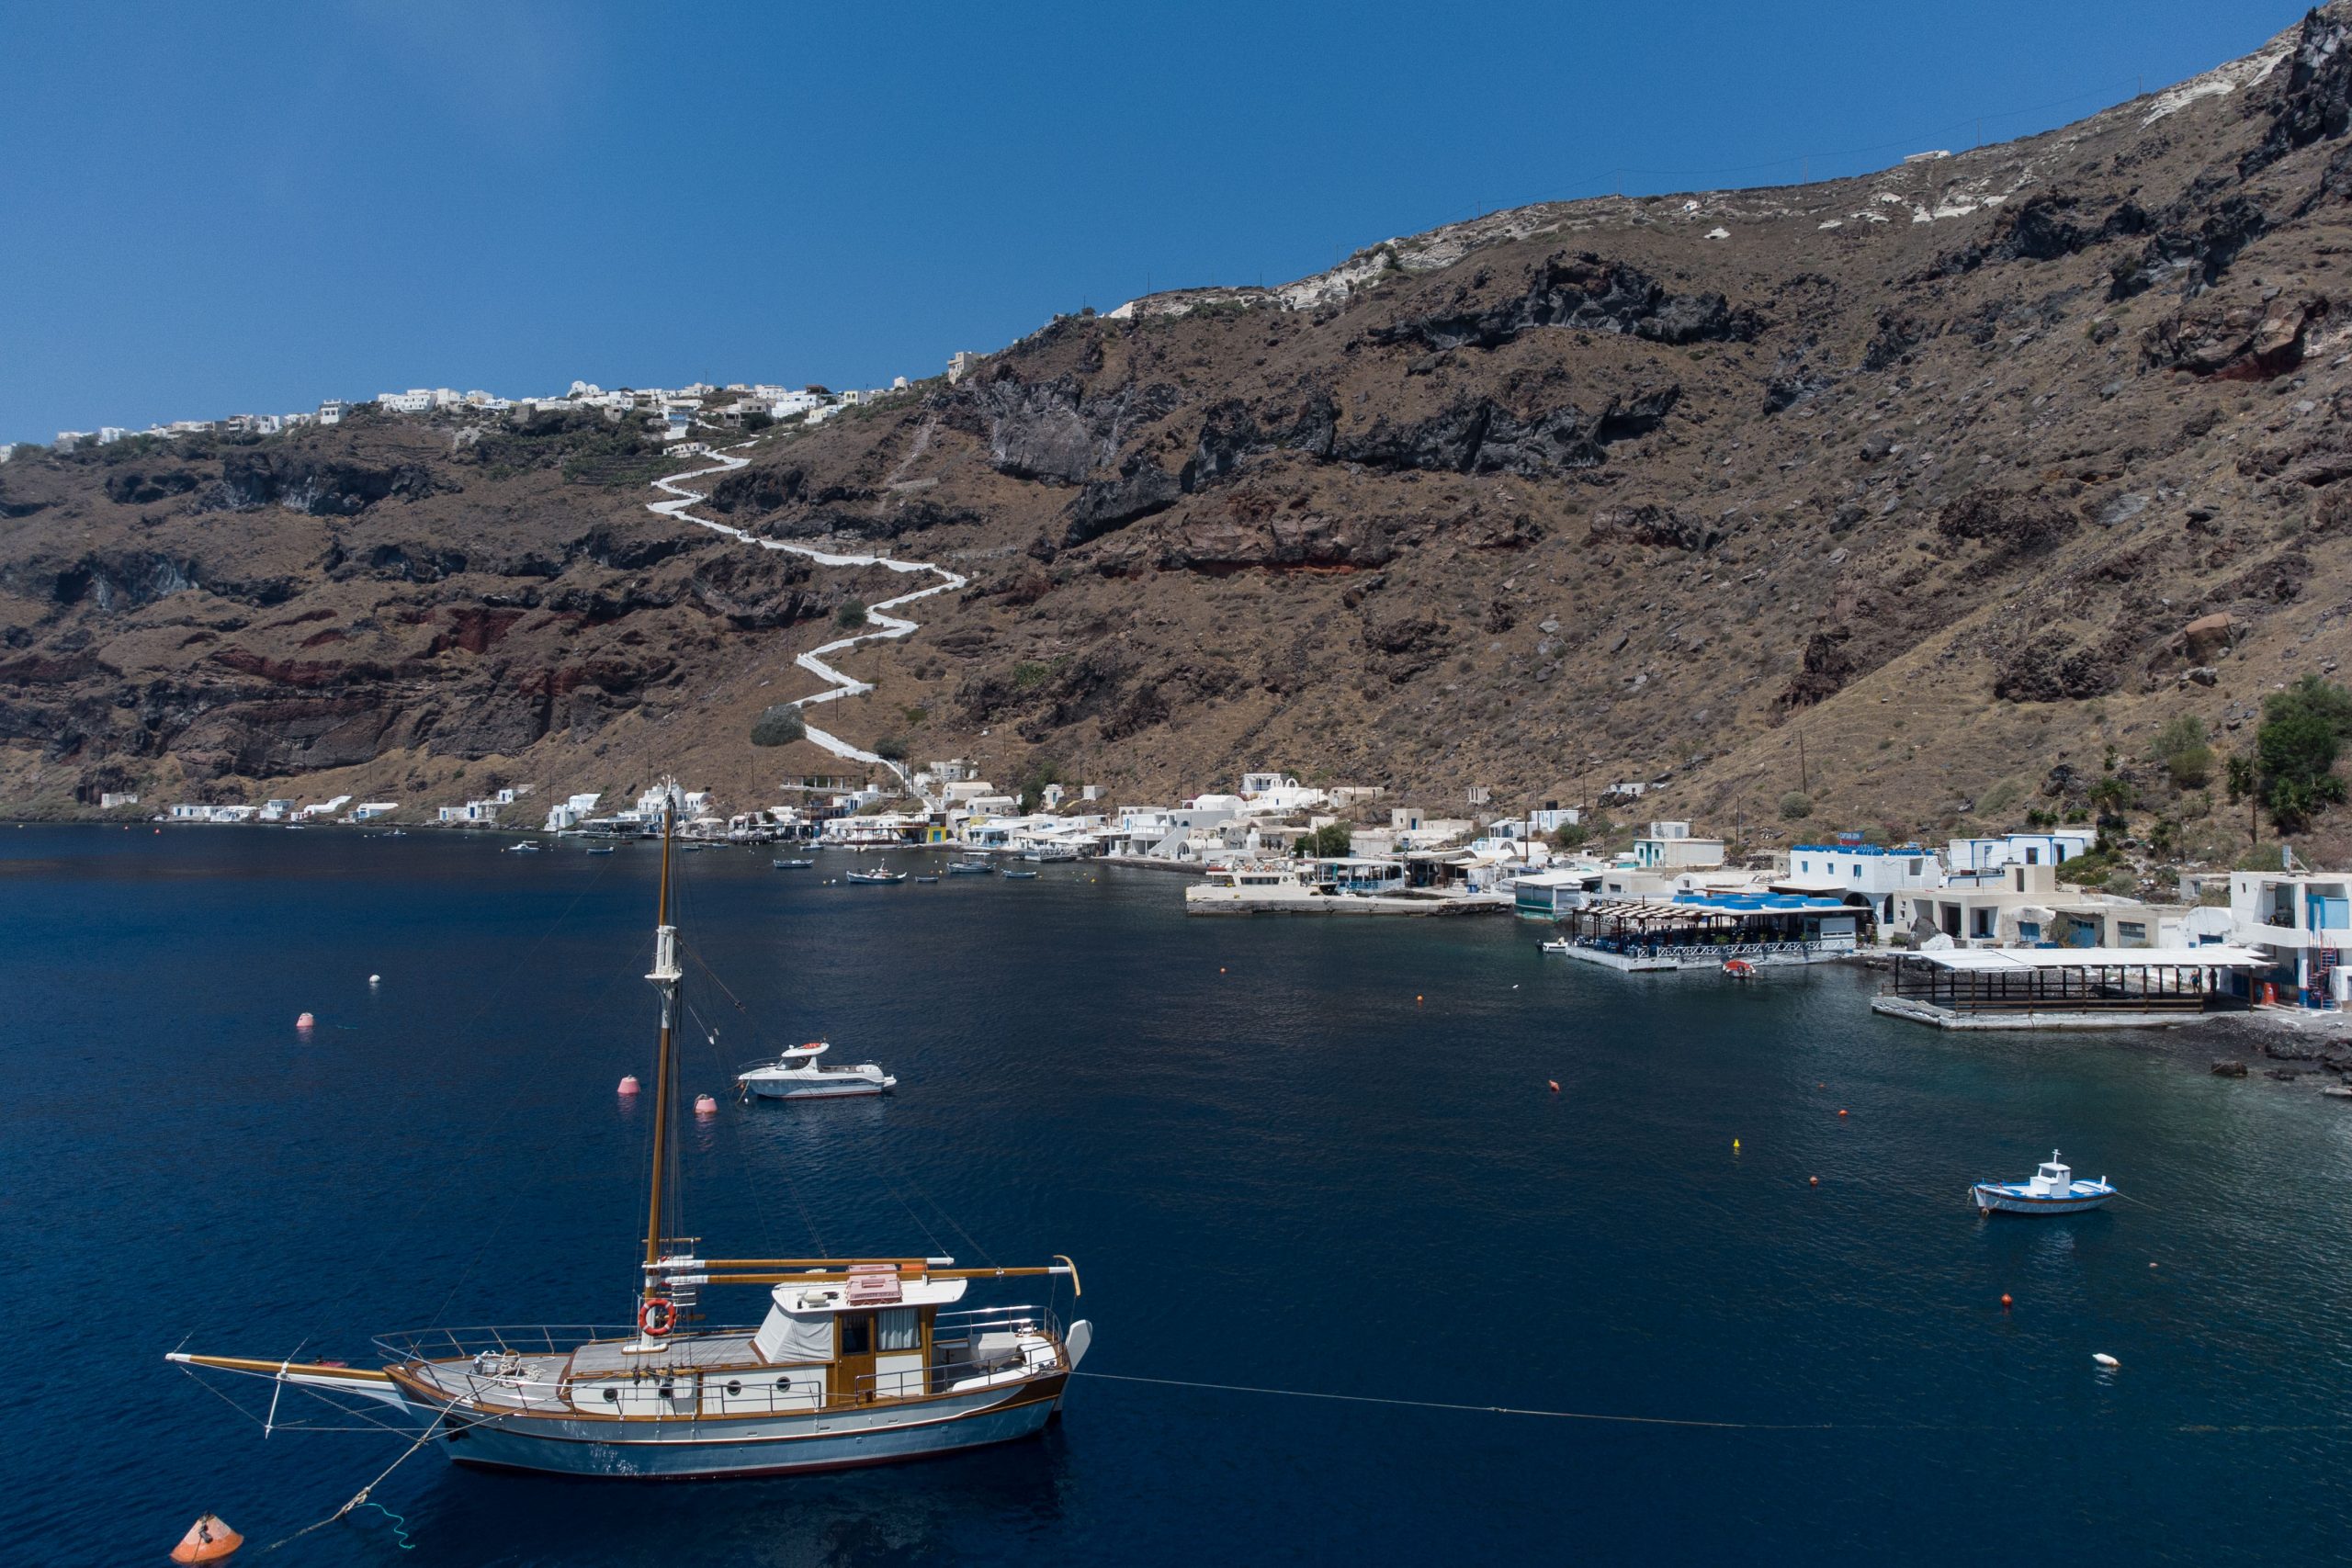 Santorini Interconnection – Hellenic Cables contractor of the cable section